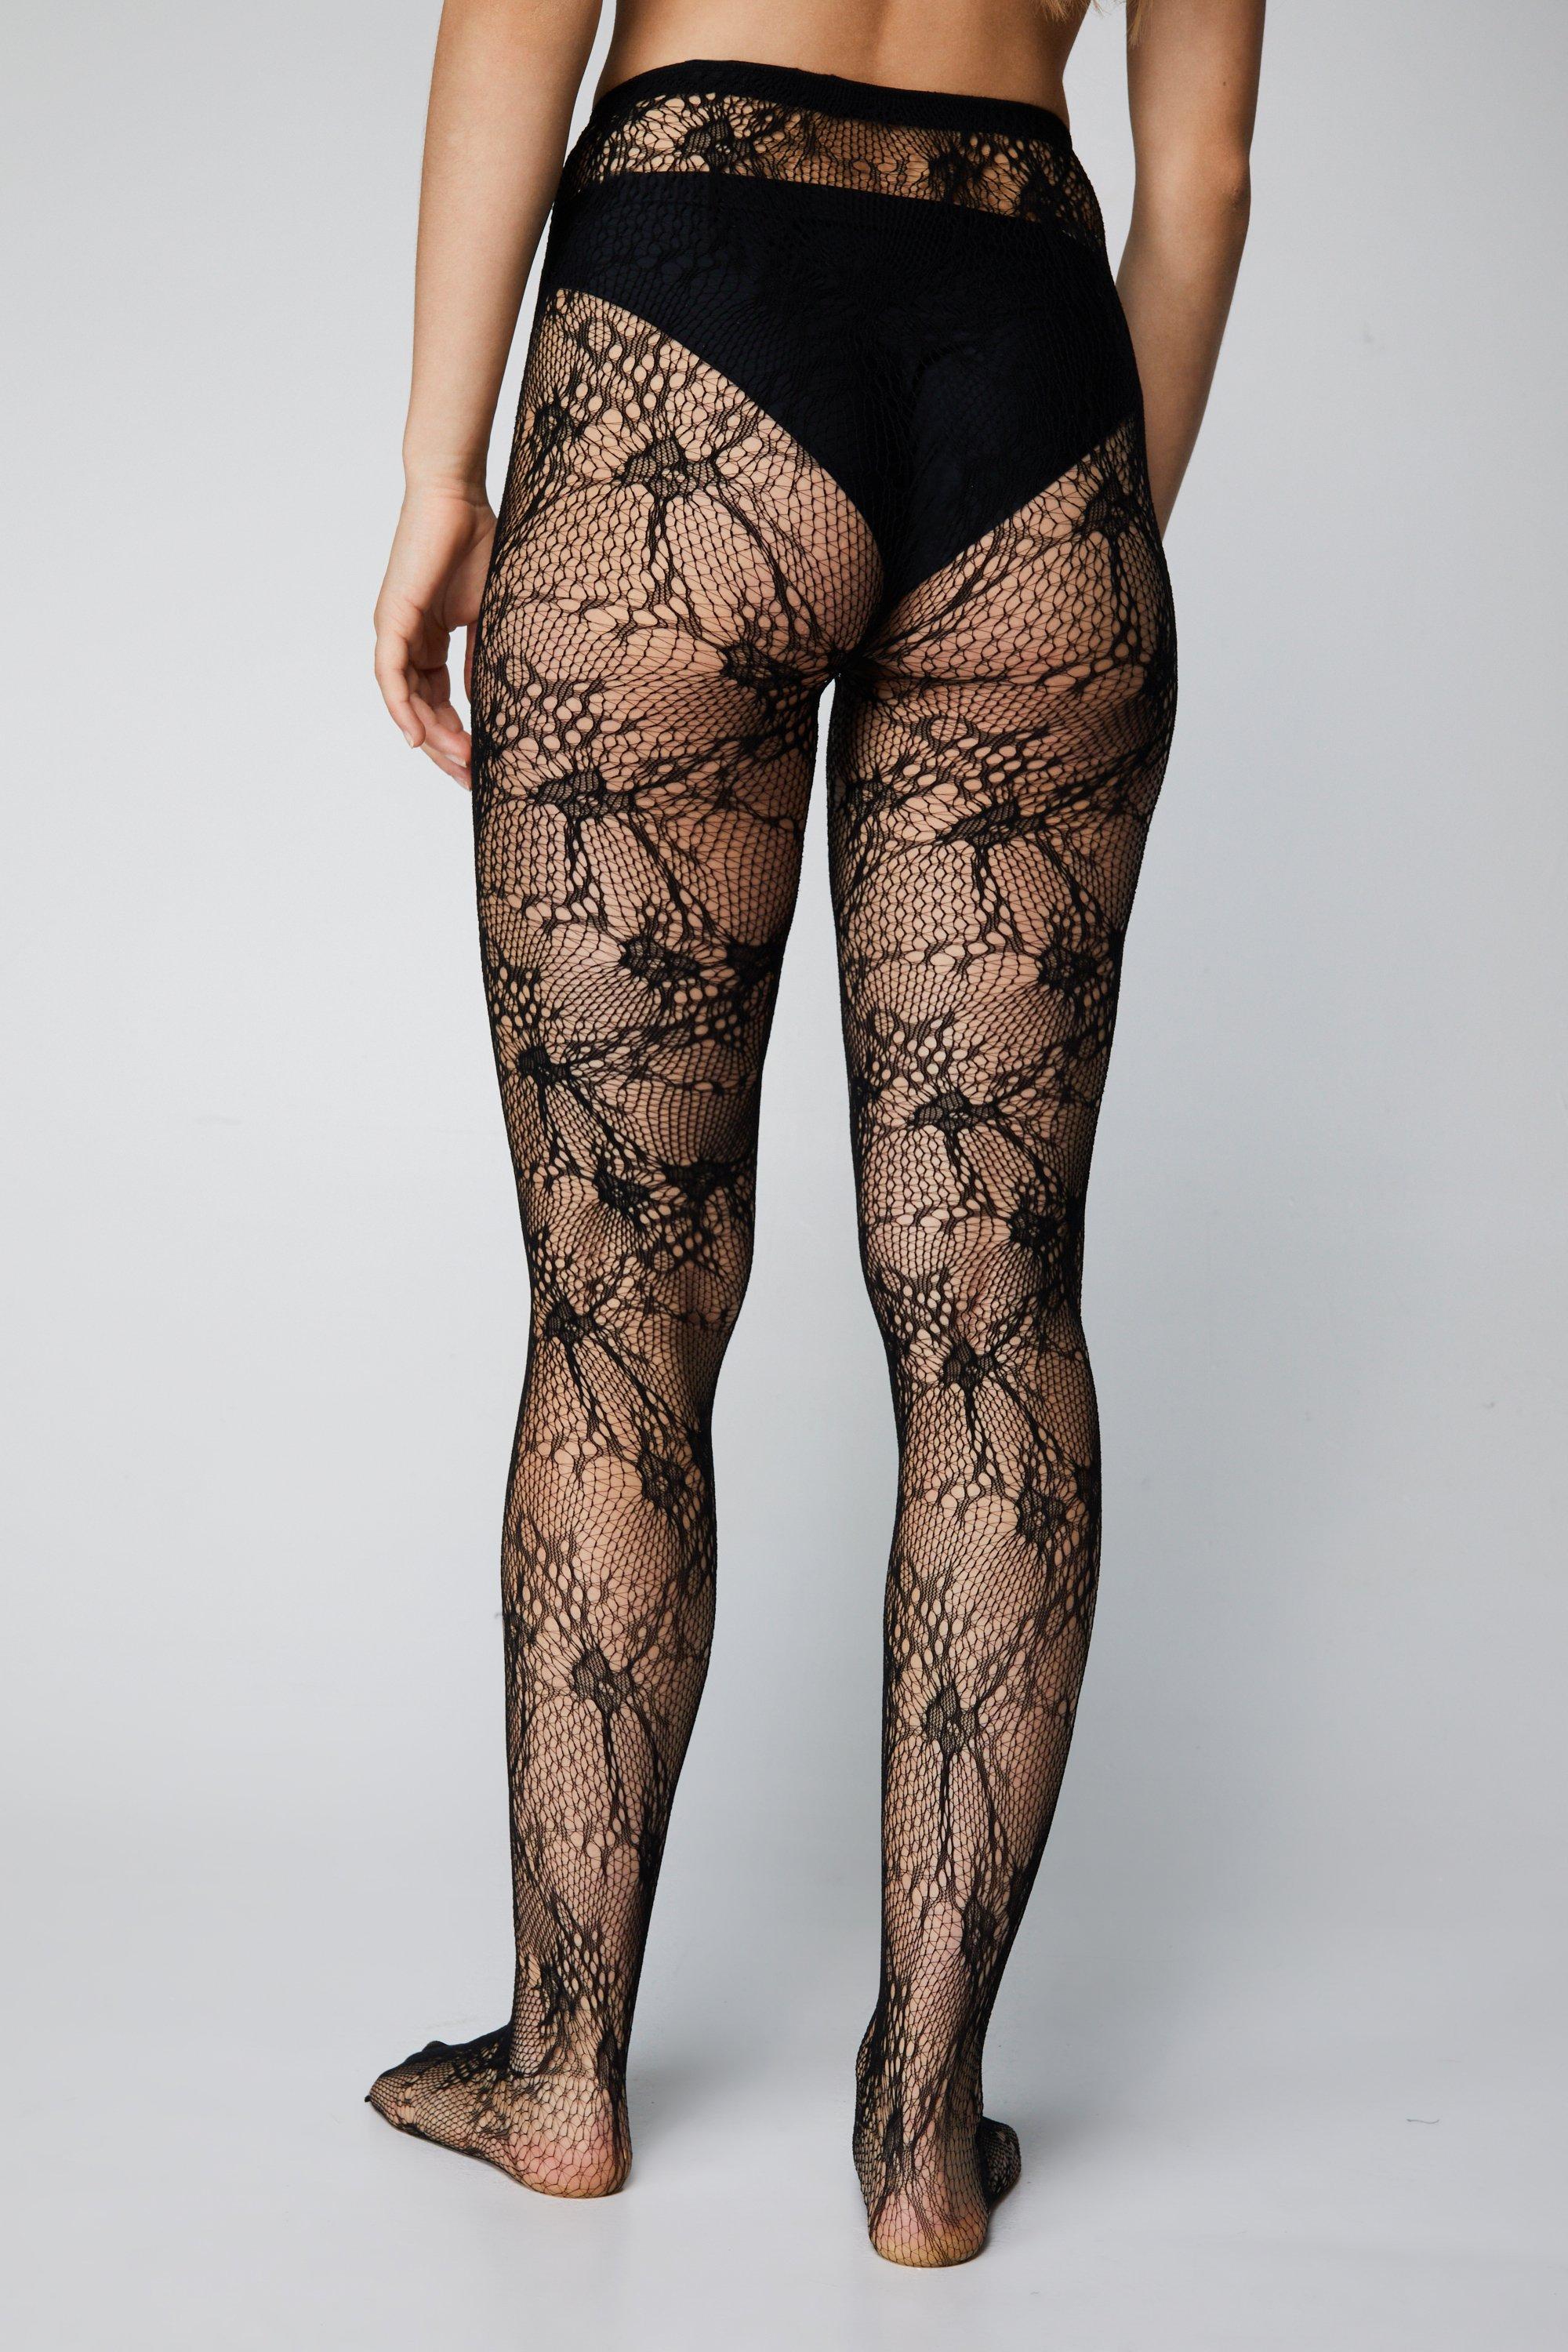 Black Whale Large Fishnet Tights